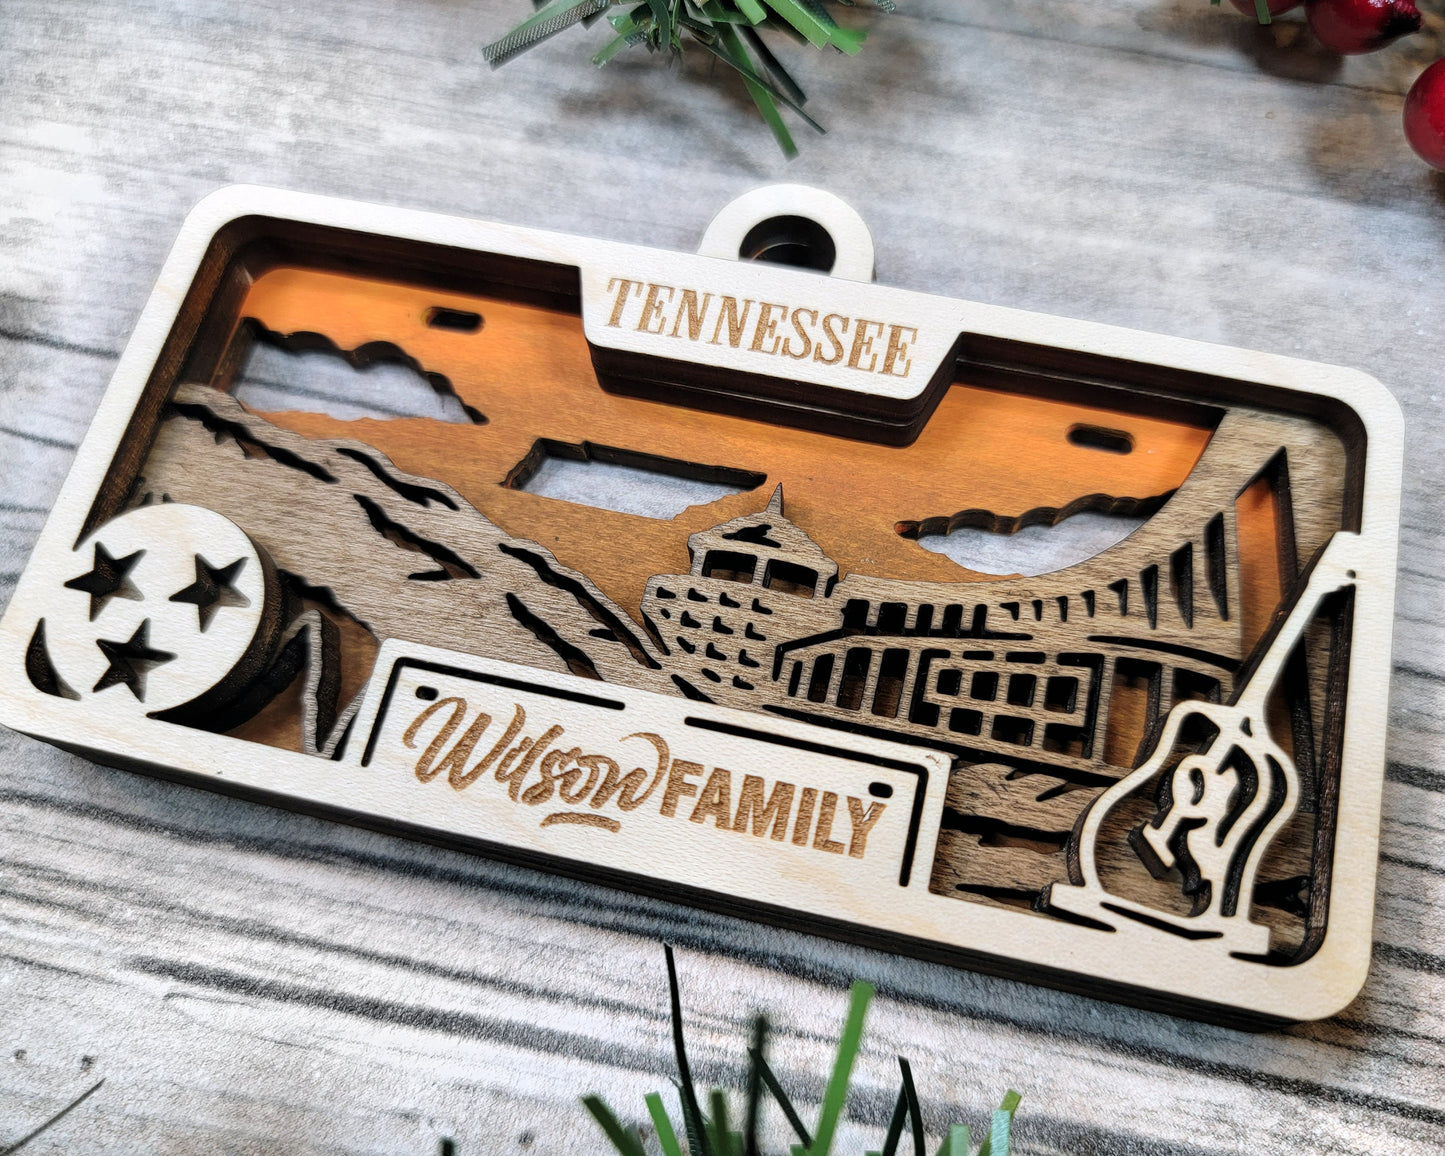 Tennessee State Plate Ornament and Signage - SVG File Download - Sized for Glowforge - Laser Ready Digital Files